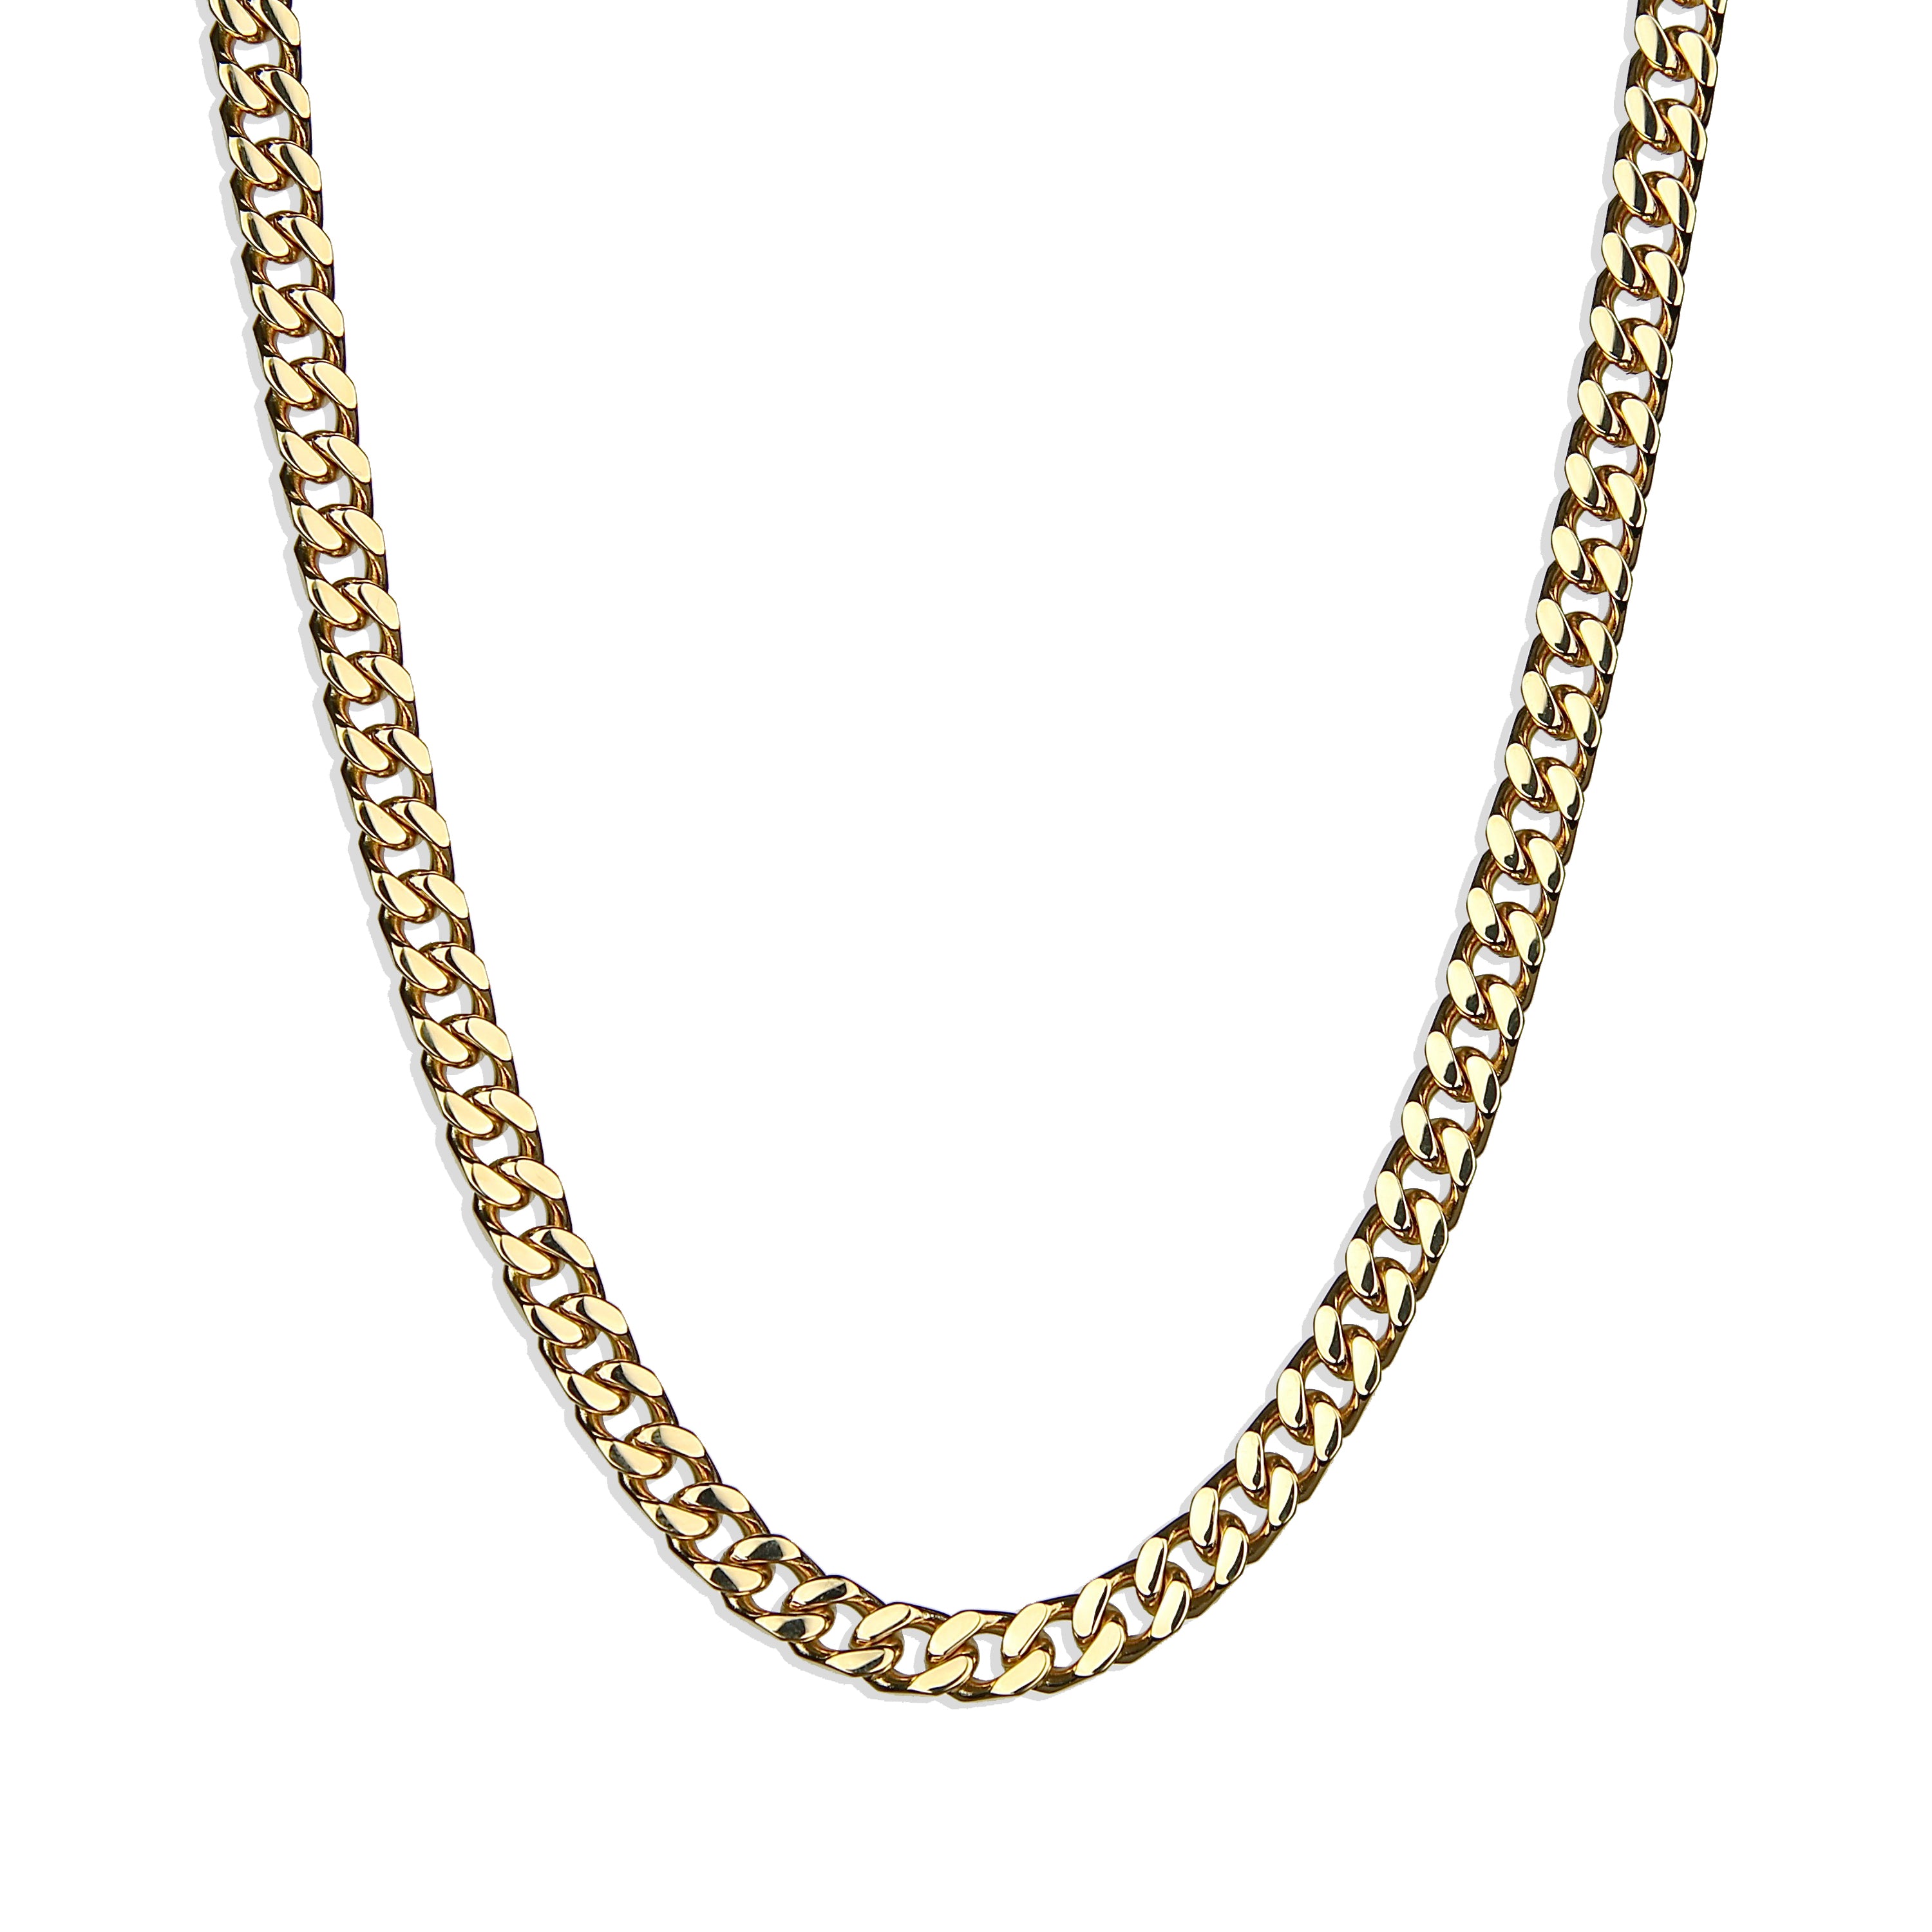 Cuban Chain Necklace - Gold 6mm